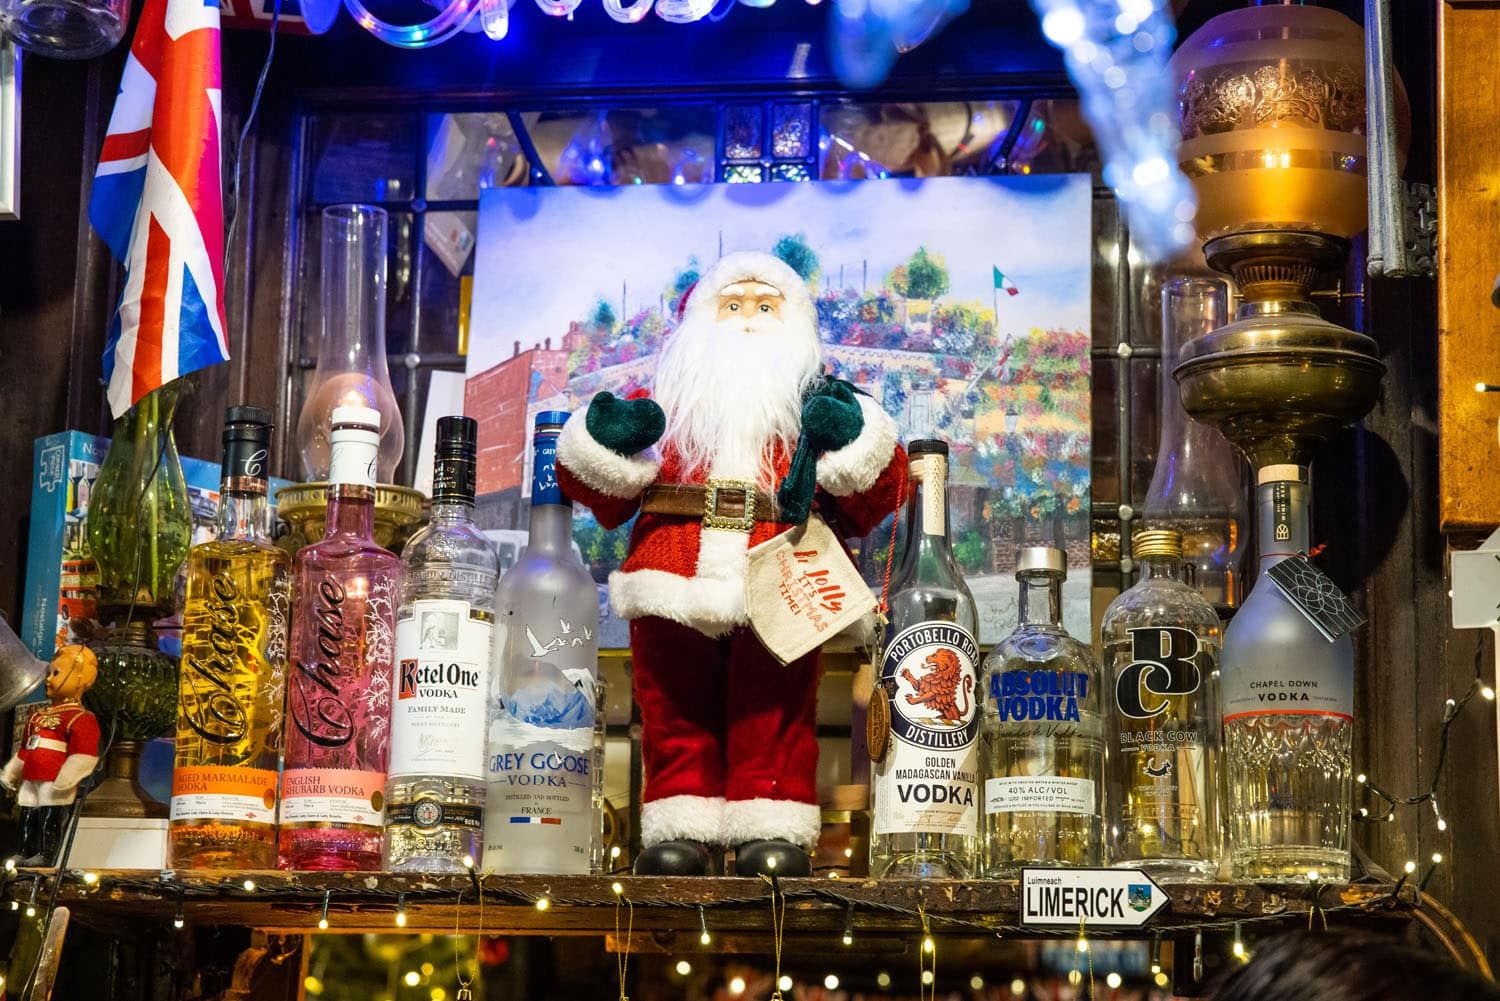 London Pub Christmas | Things to do in London at Christmas